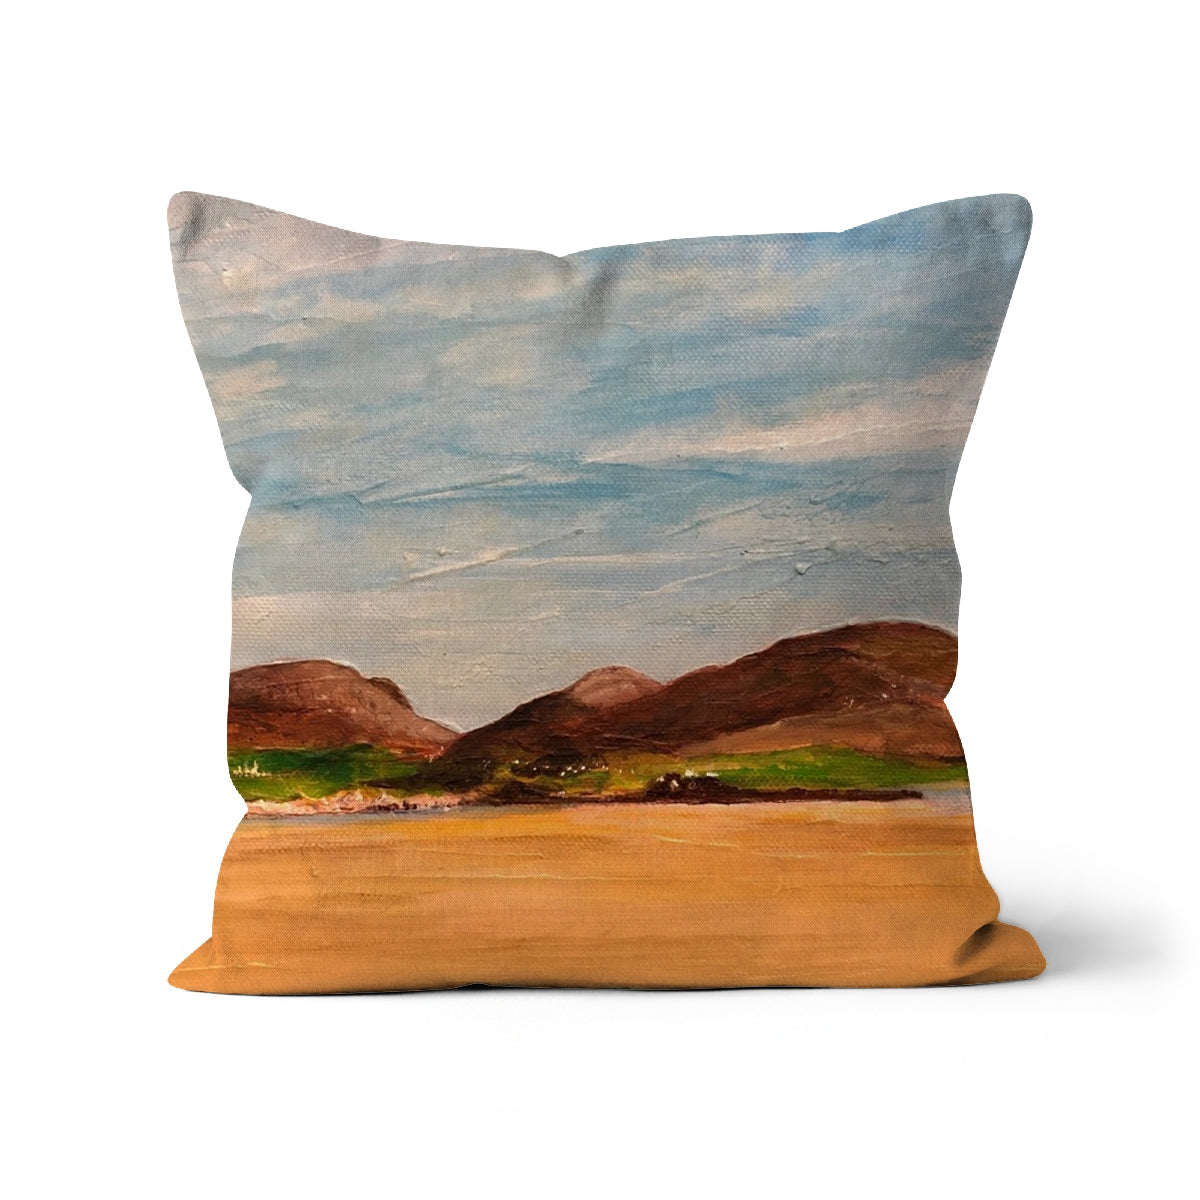 Uig Sands Lewis Art Gifts Cushion-Cushions-Hebridean Islands Art Gallery-Canvas-18"x18"-Paintings, Prints, Homeware, Art Gifts From Scotland By Scottish Artist Kevin Hunter